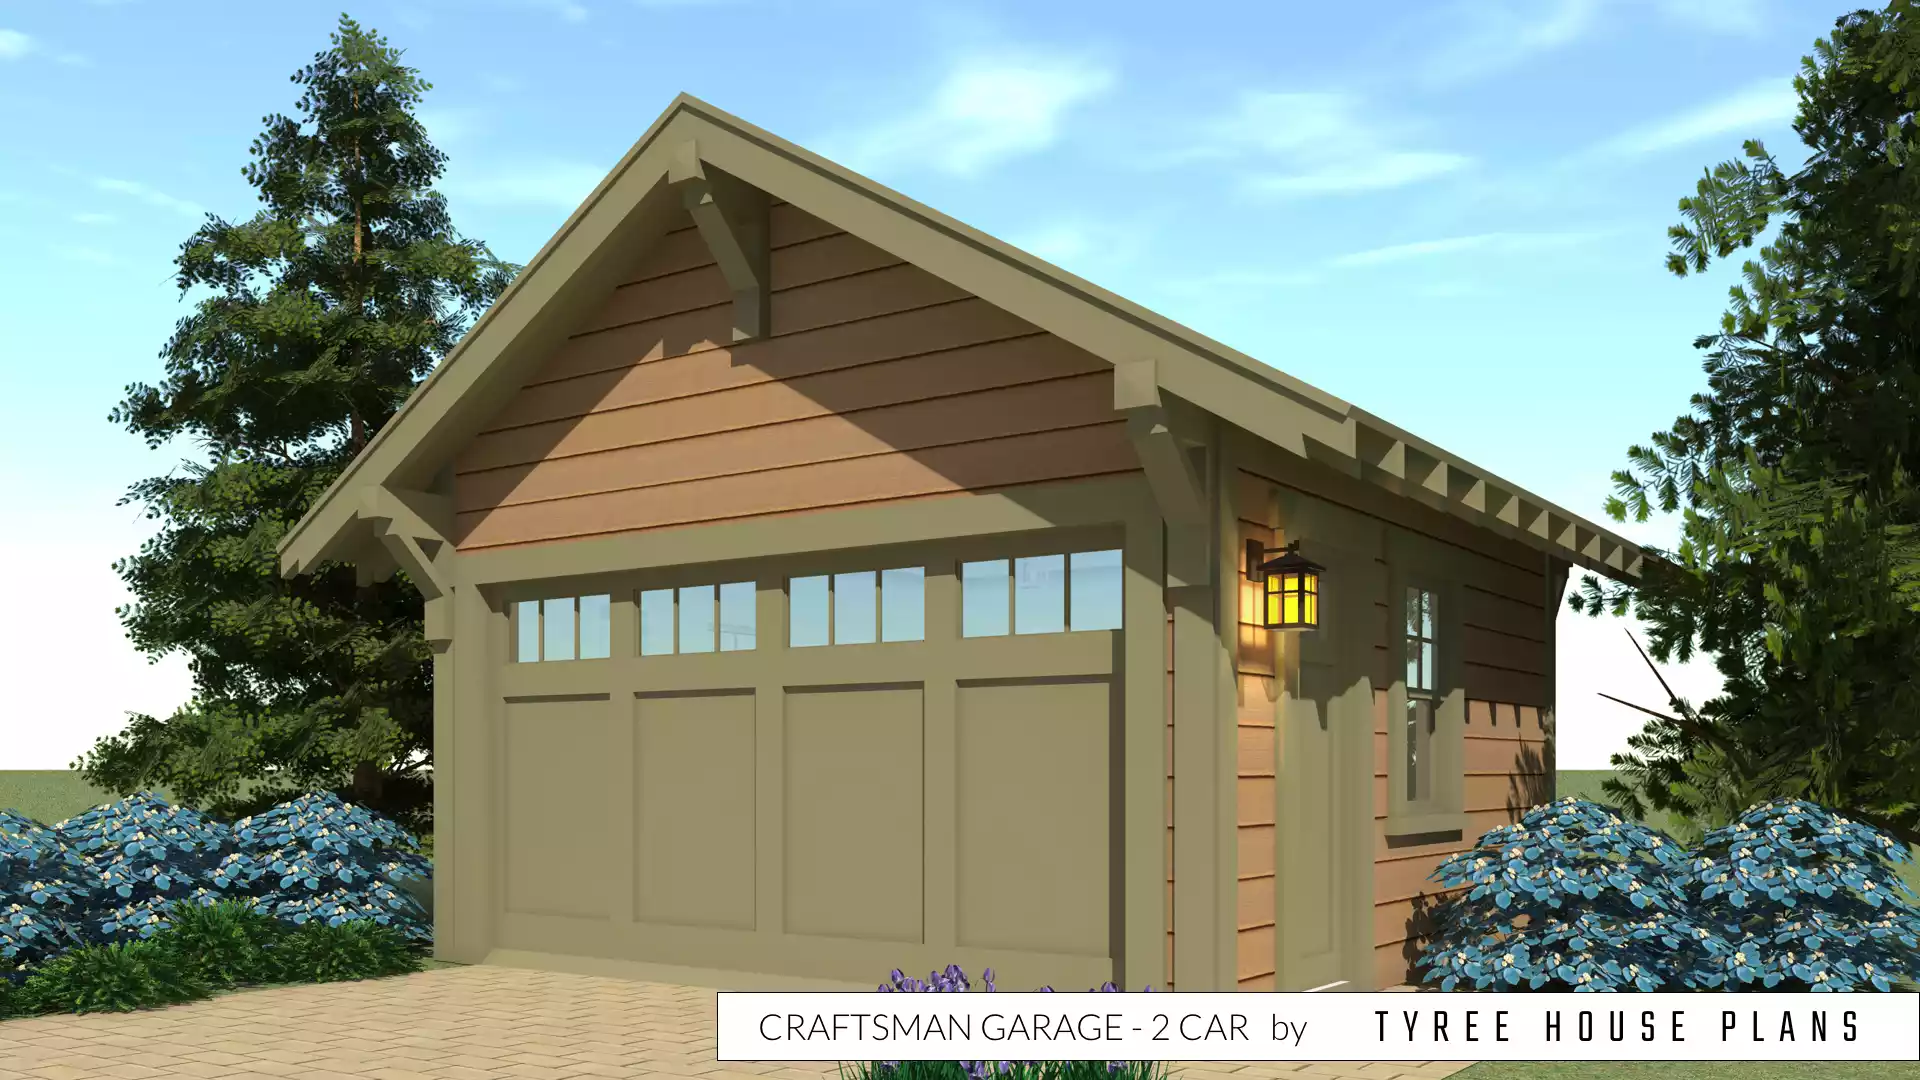 Craftsman 2 Car Garage by Tyree House Plans.